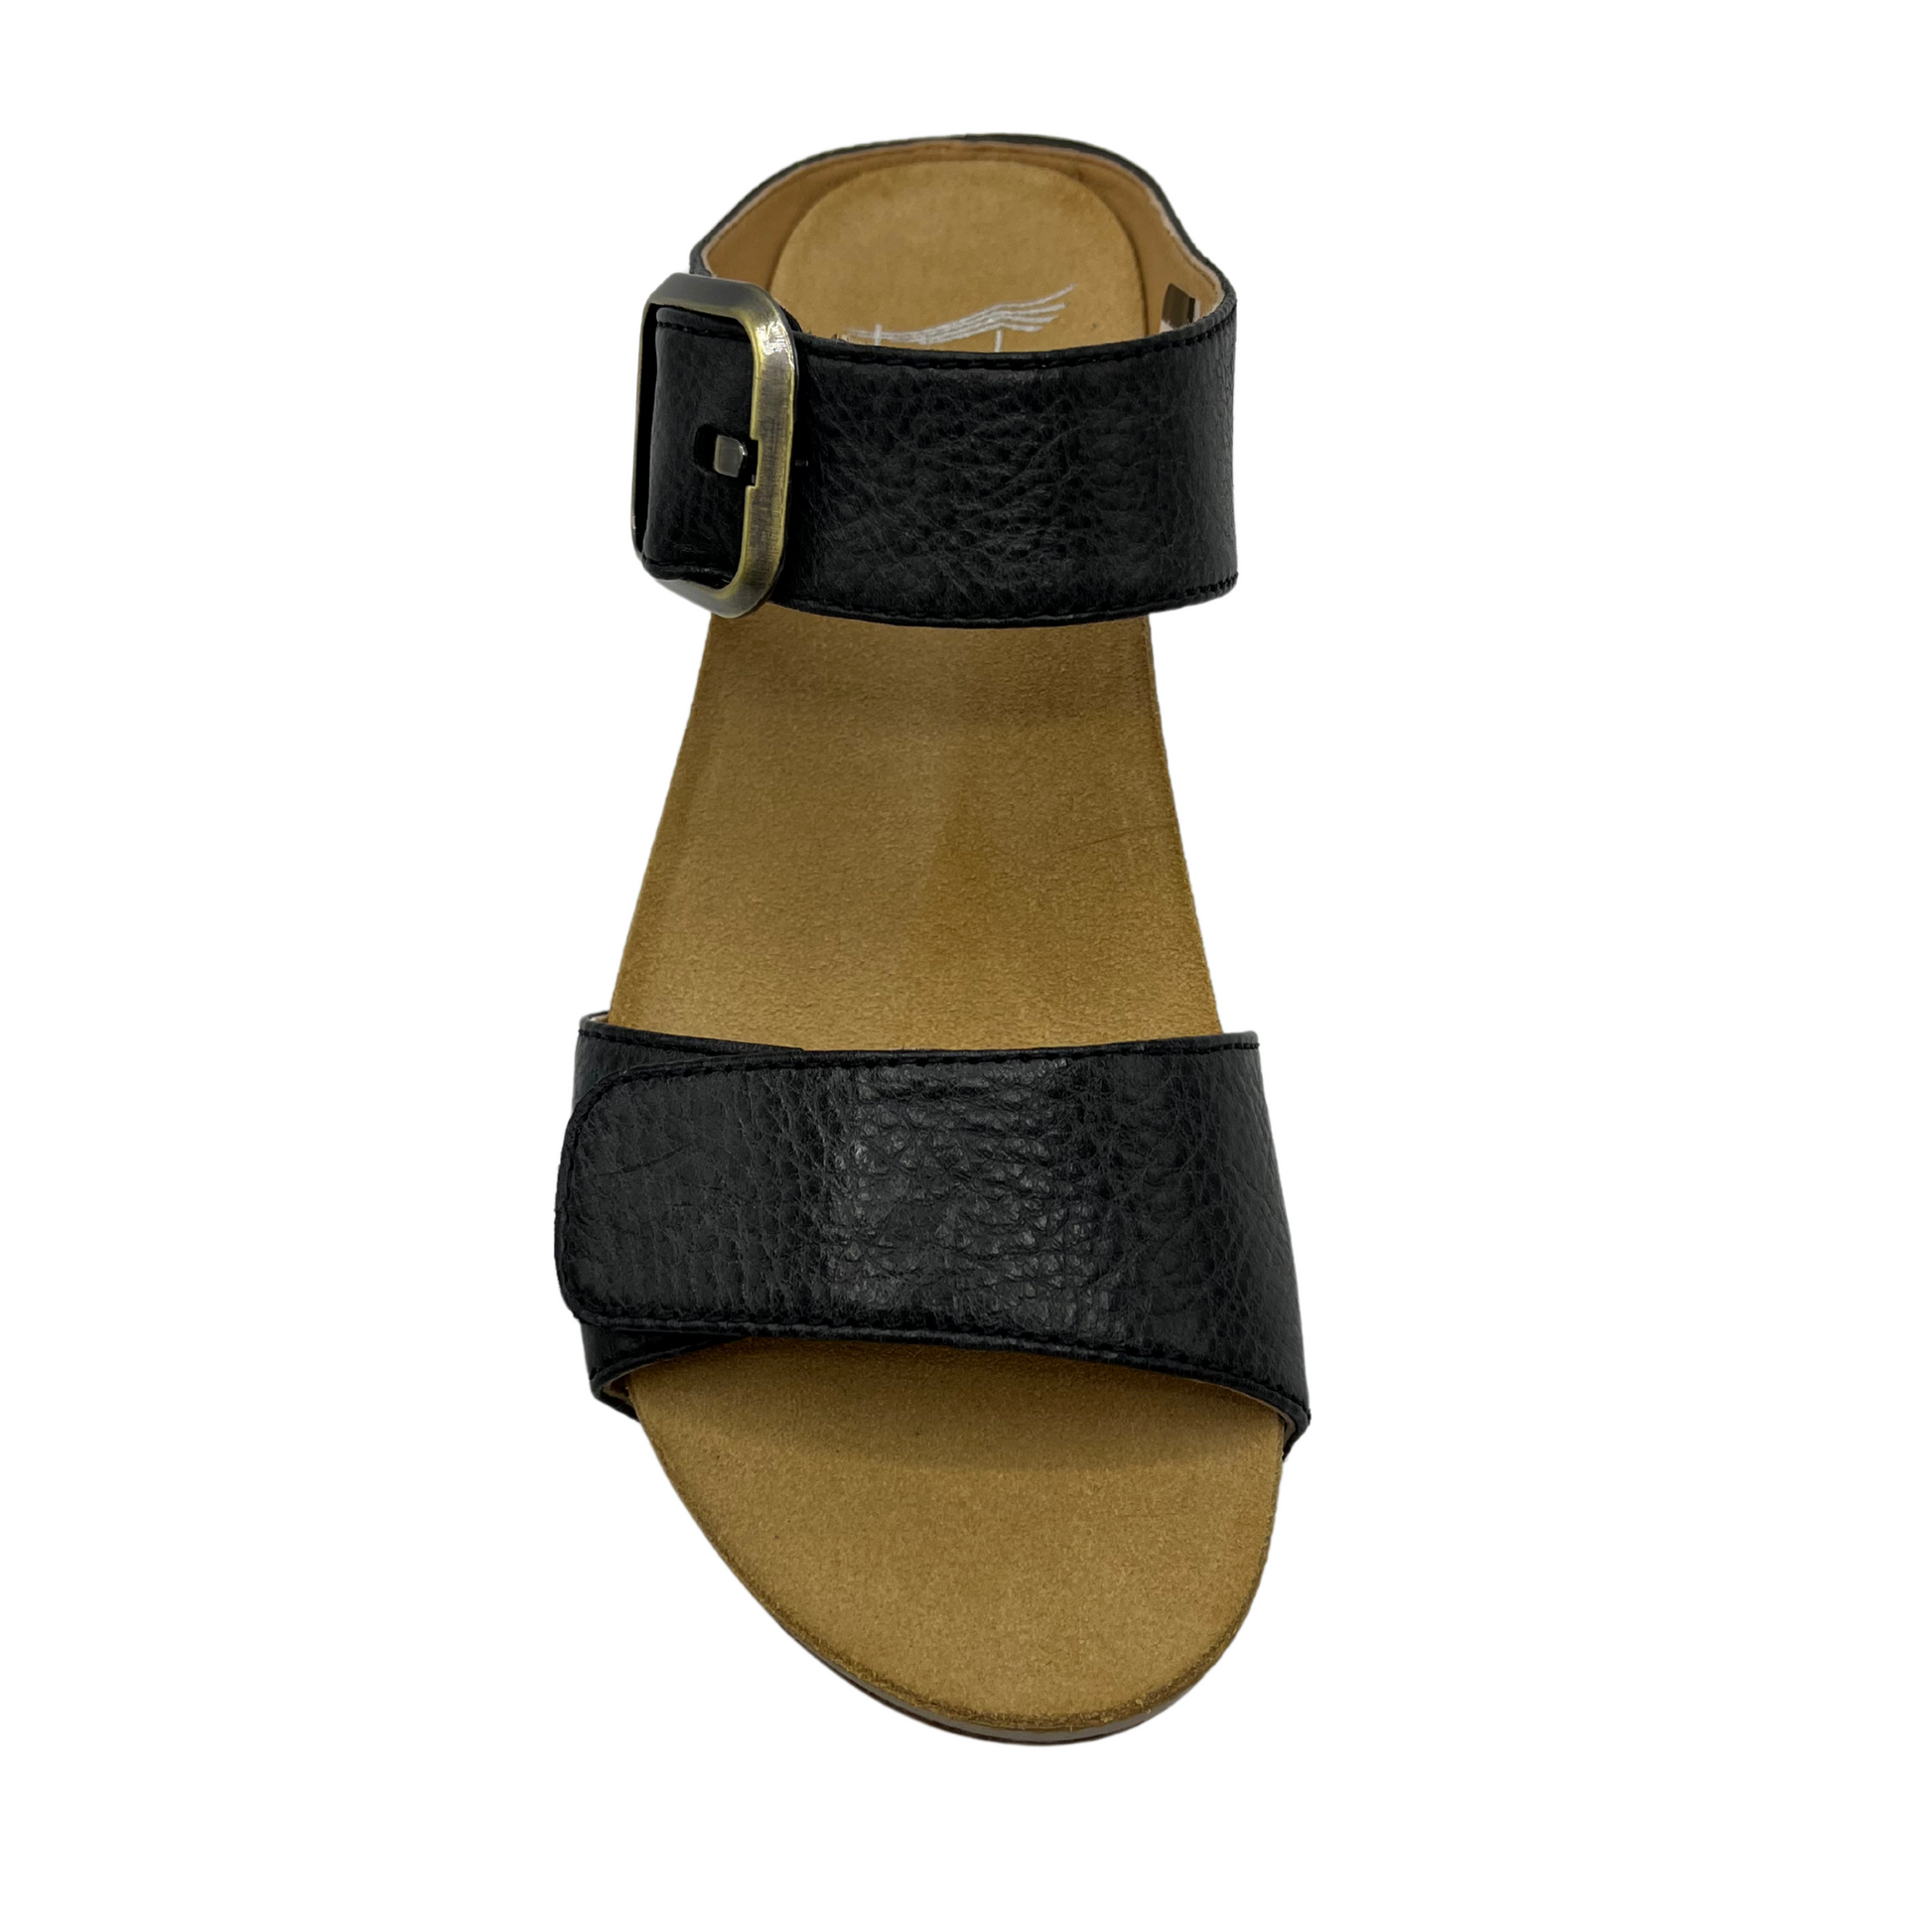 Top view of black leather strapped sandal in a slip on style with a buckle strap and tan lining